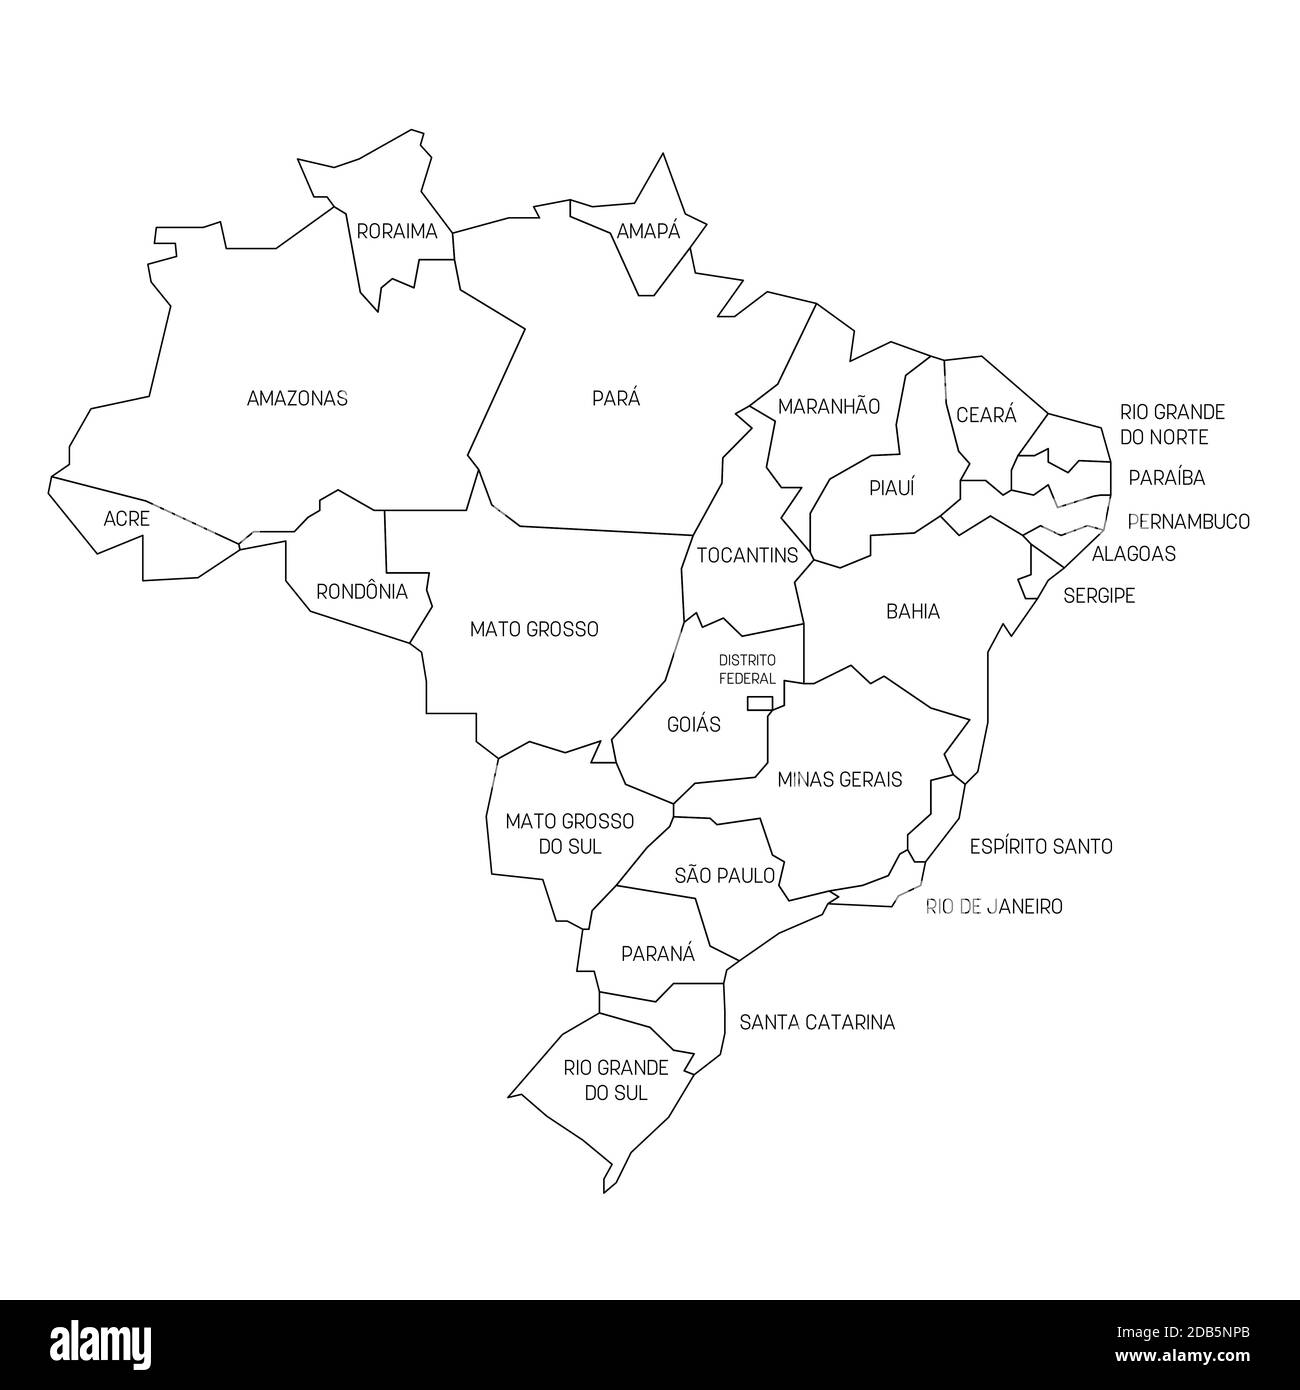 Black outline political map of Brazil. Administrative divisions - states. Simple vector map with labels. Stock Vector